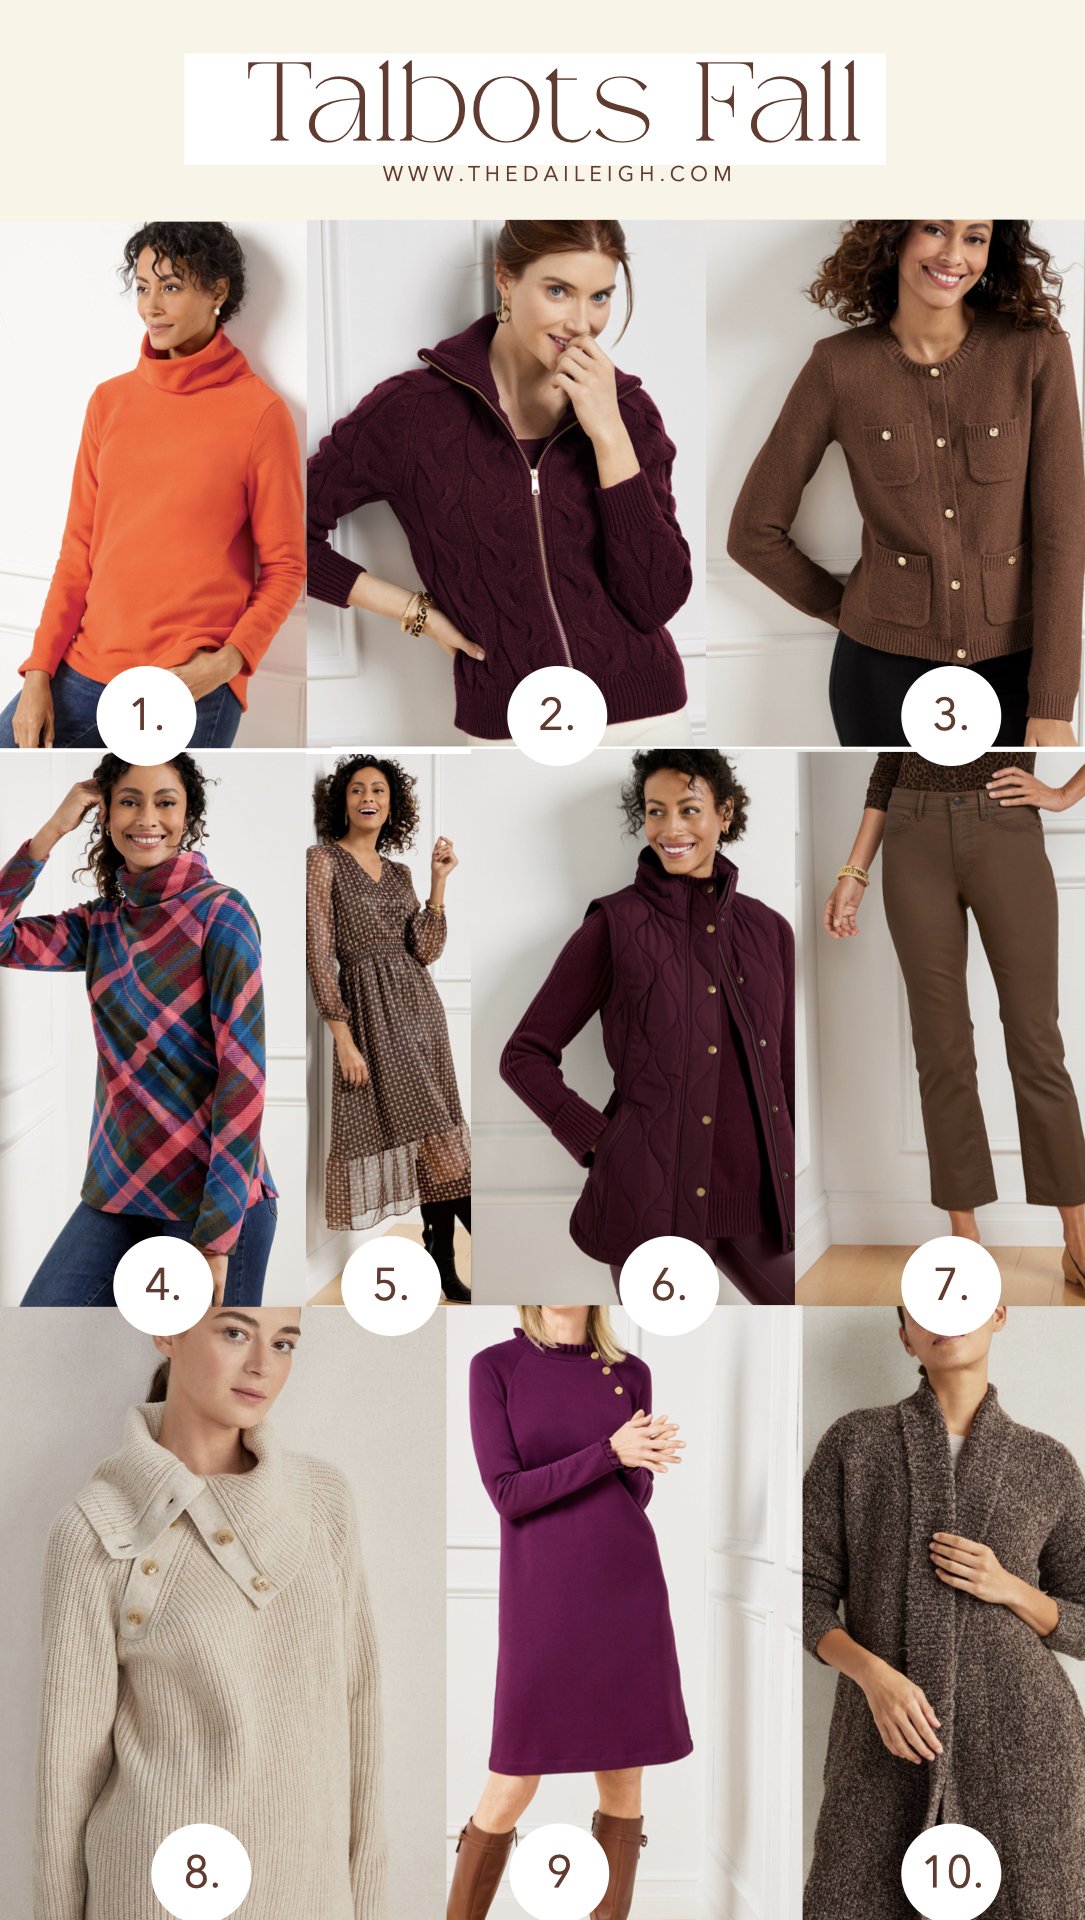 Talbots: Top 20 Fall Styles — THE DAILEIGH